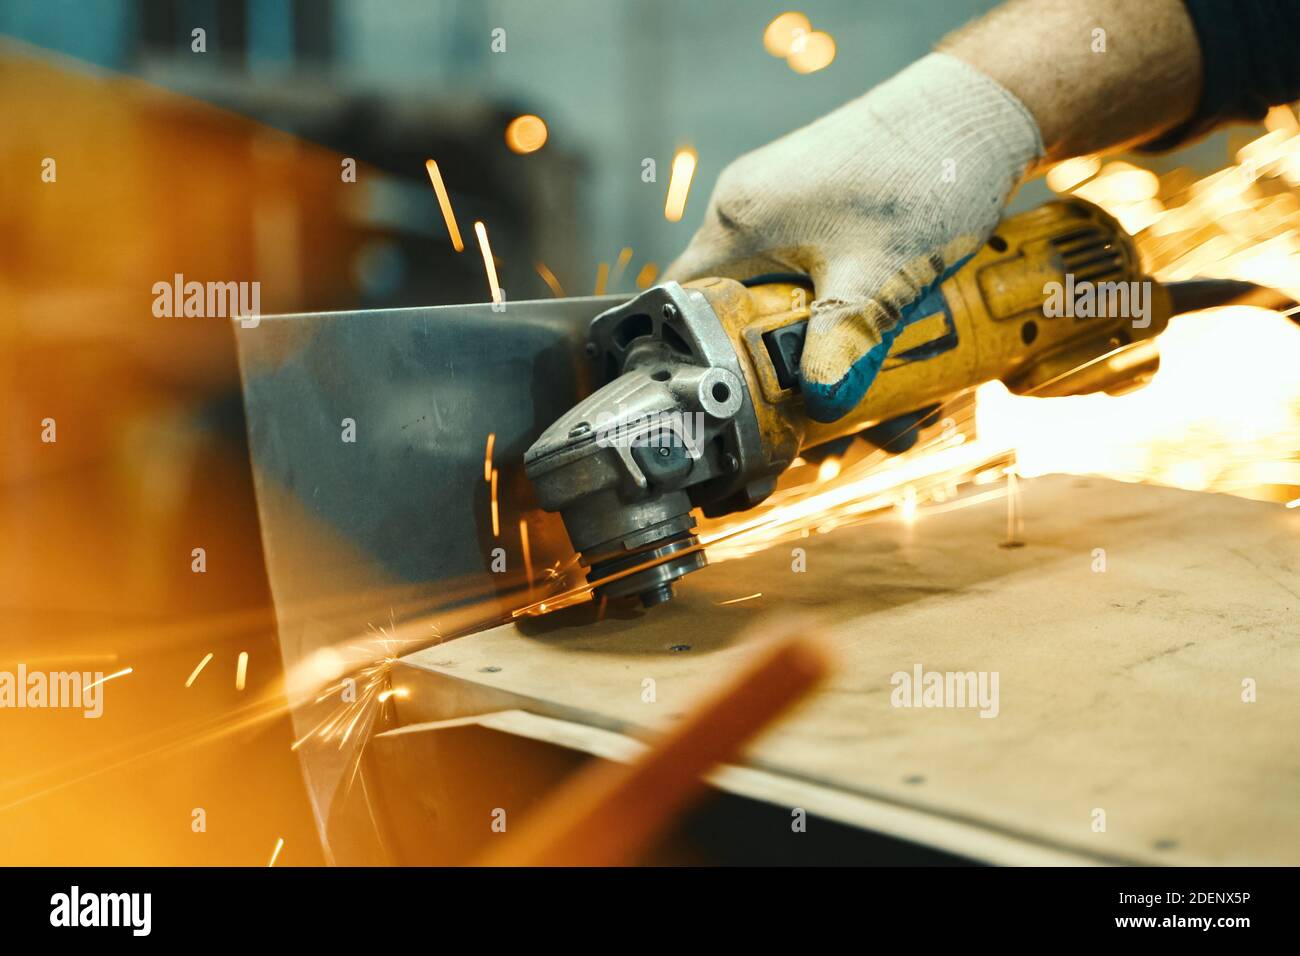 Metal processing with angle grinder. Sparks in metalworking Stock Photo